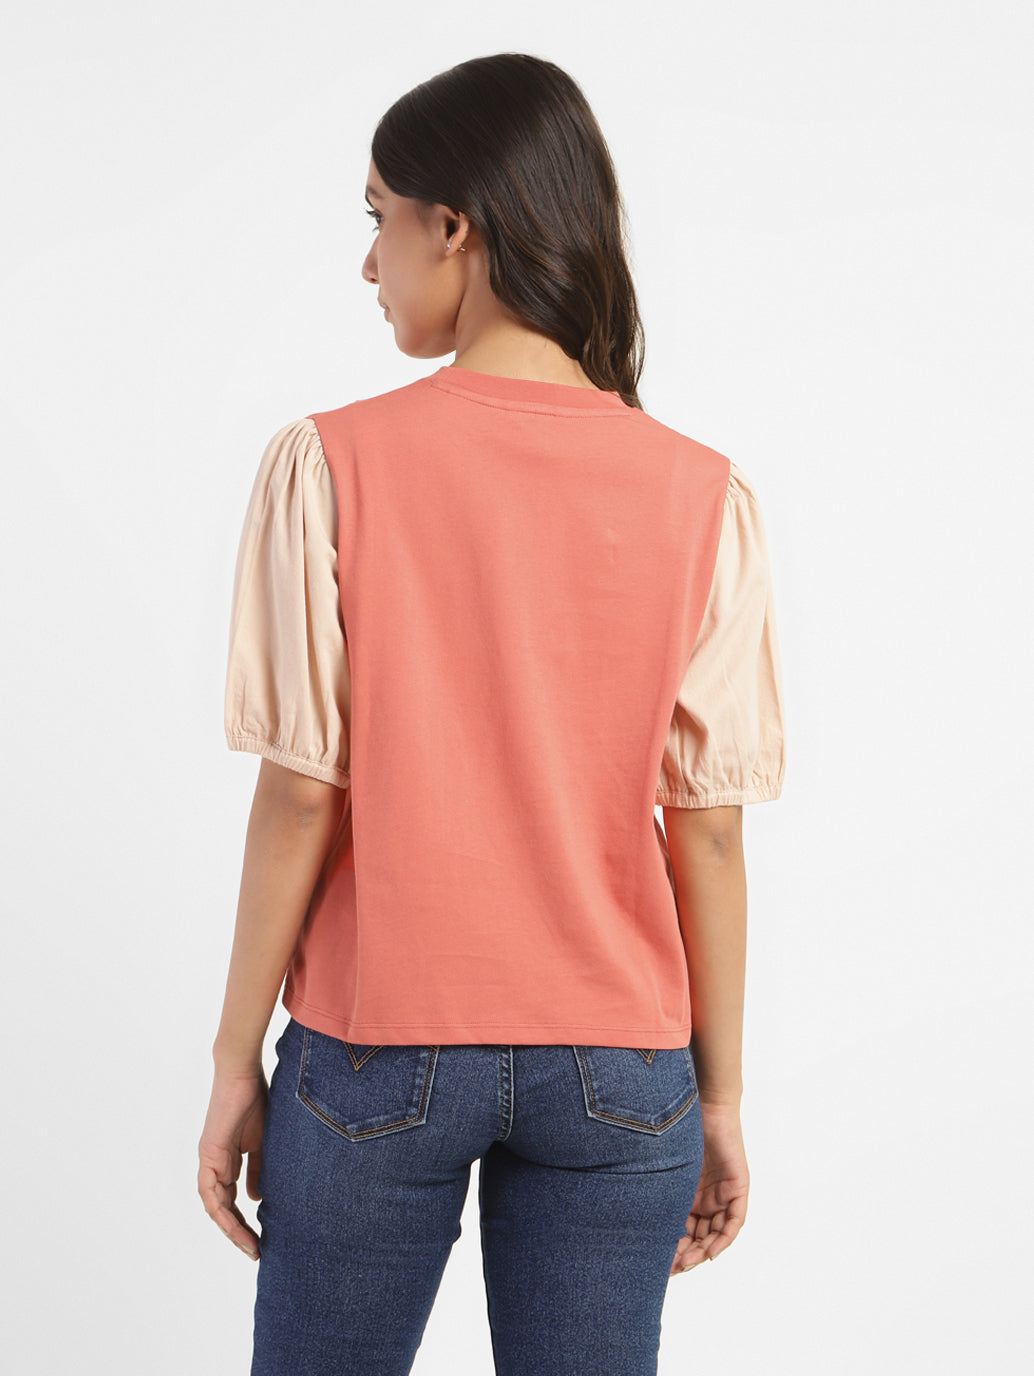 Women's Colorblock Round Neck Top Coral